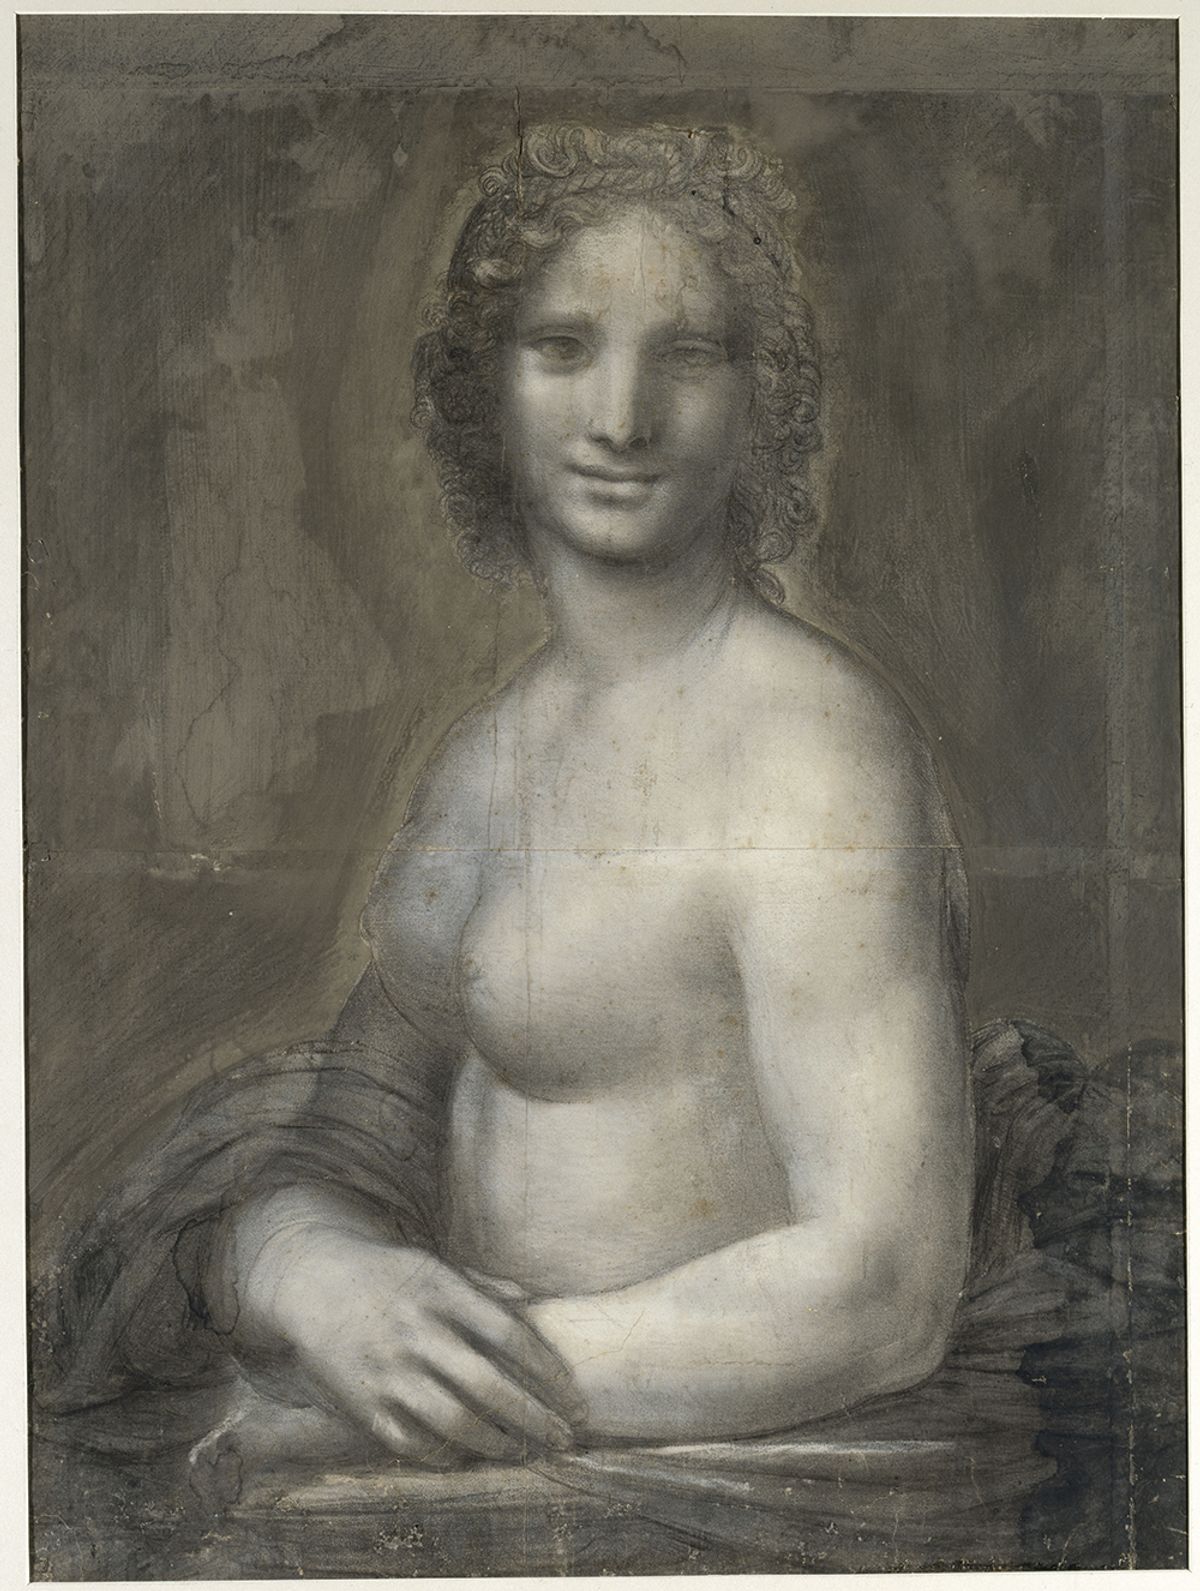 Monalisa Nude - French exhibition aims to reveal naked truth about 'nude Mona Lisa'